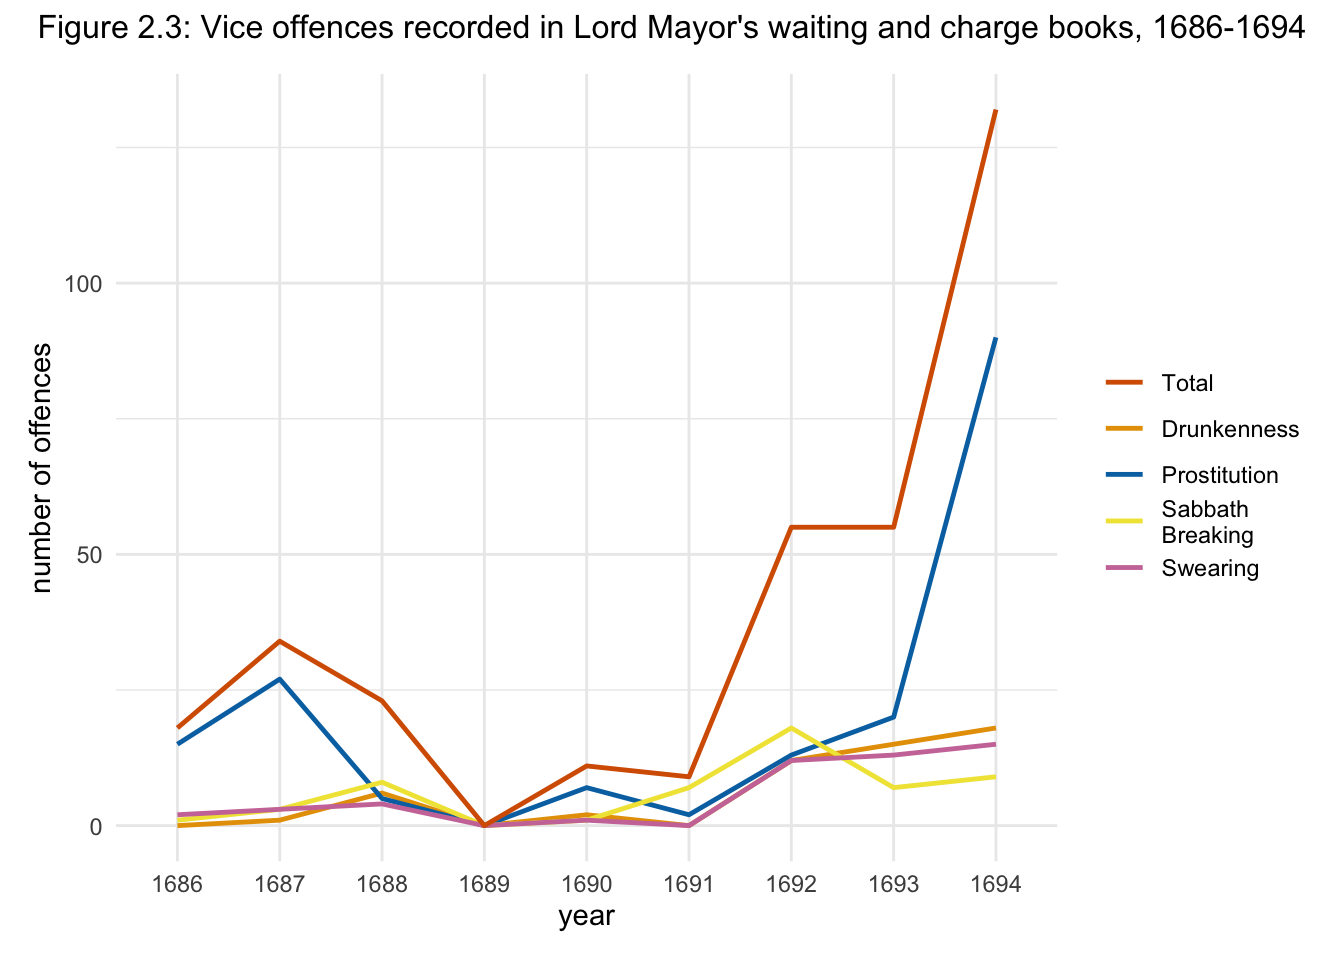 Figure 2.3: Vice offences recorded in Lord Mayor's waiting and charge books, 1686-1694